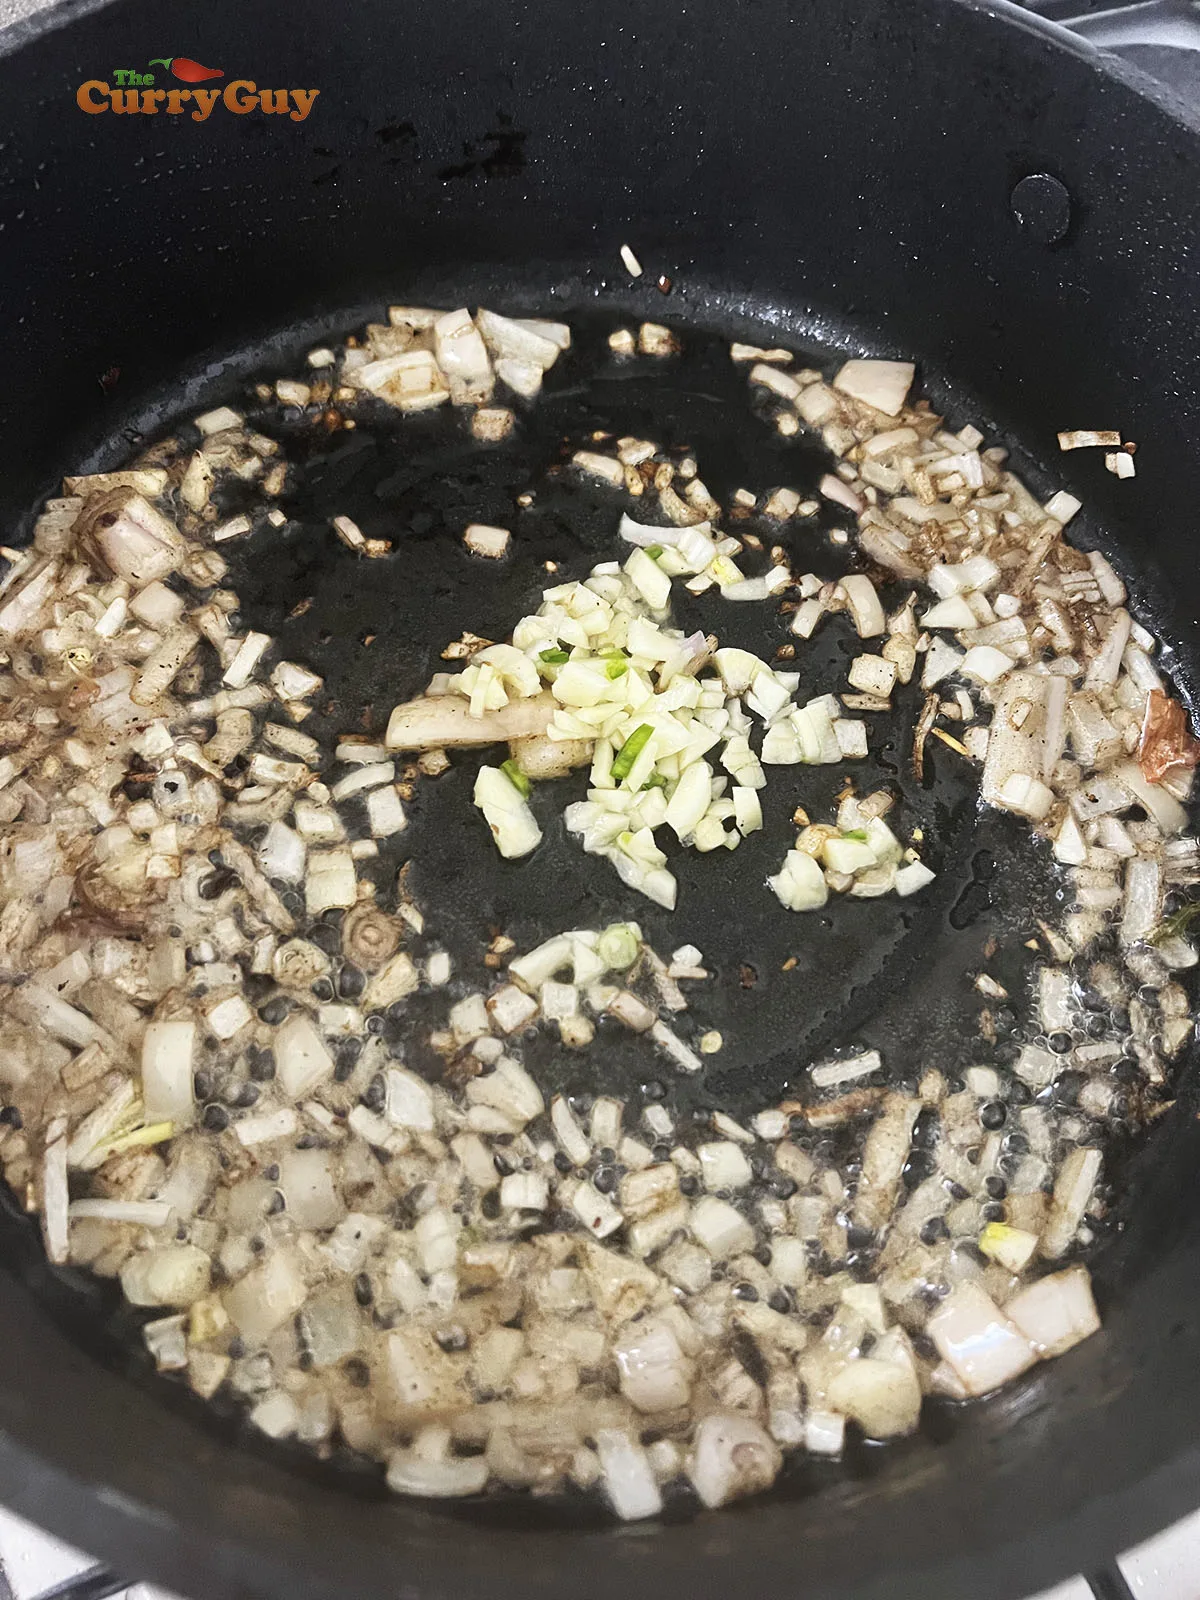 Frying onion and garlic for the sauce.